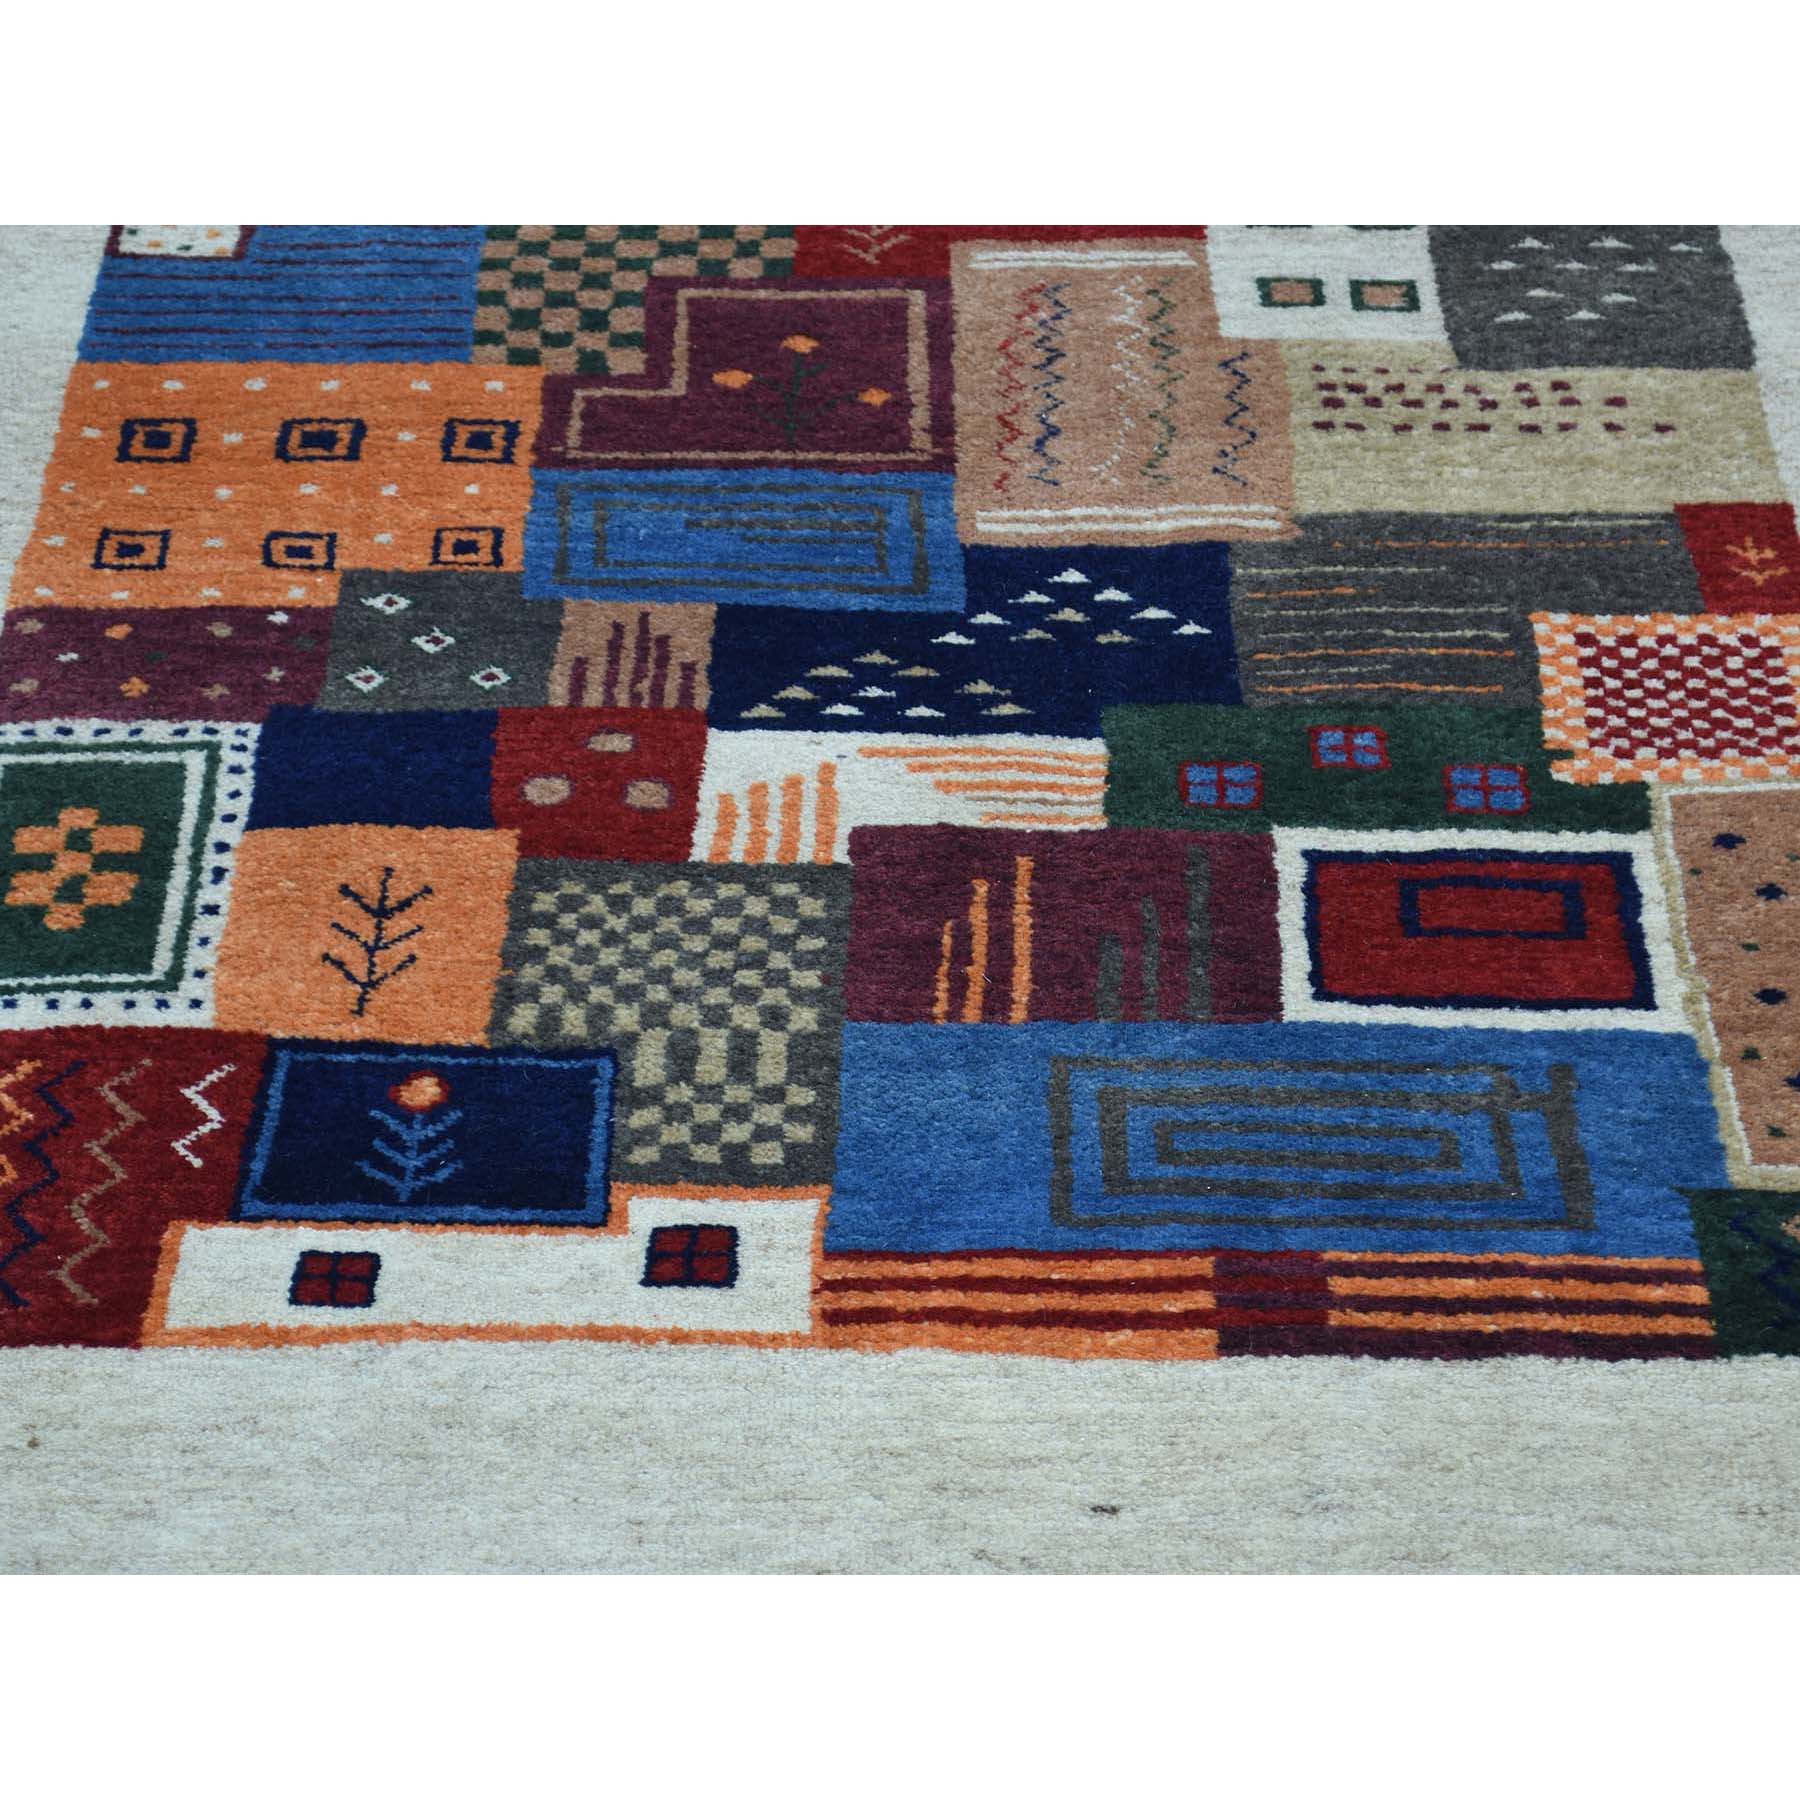 2-x3-1-- Hand-Knotted Persian Wool Lori Buft Gabbeh Patchwork Design Rug 